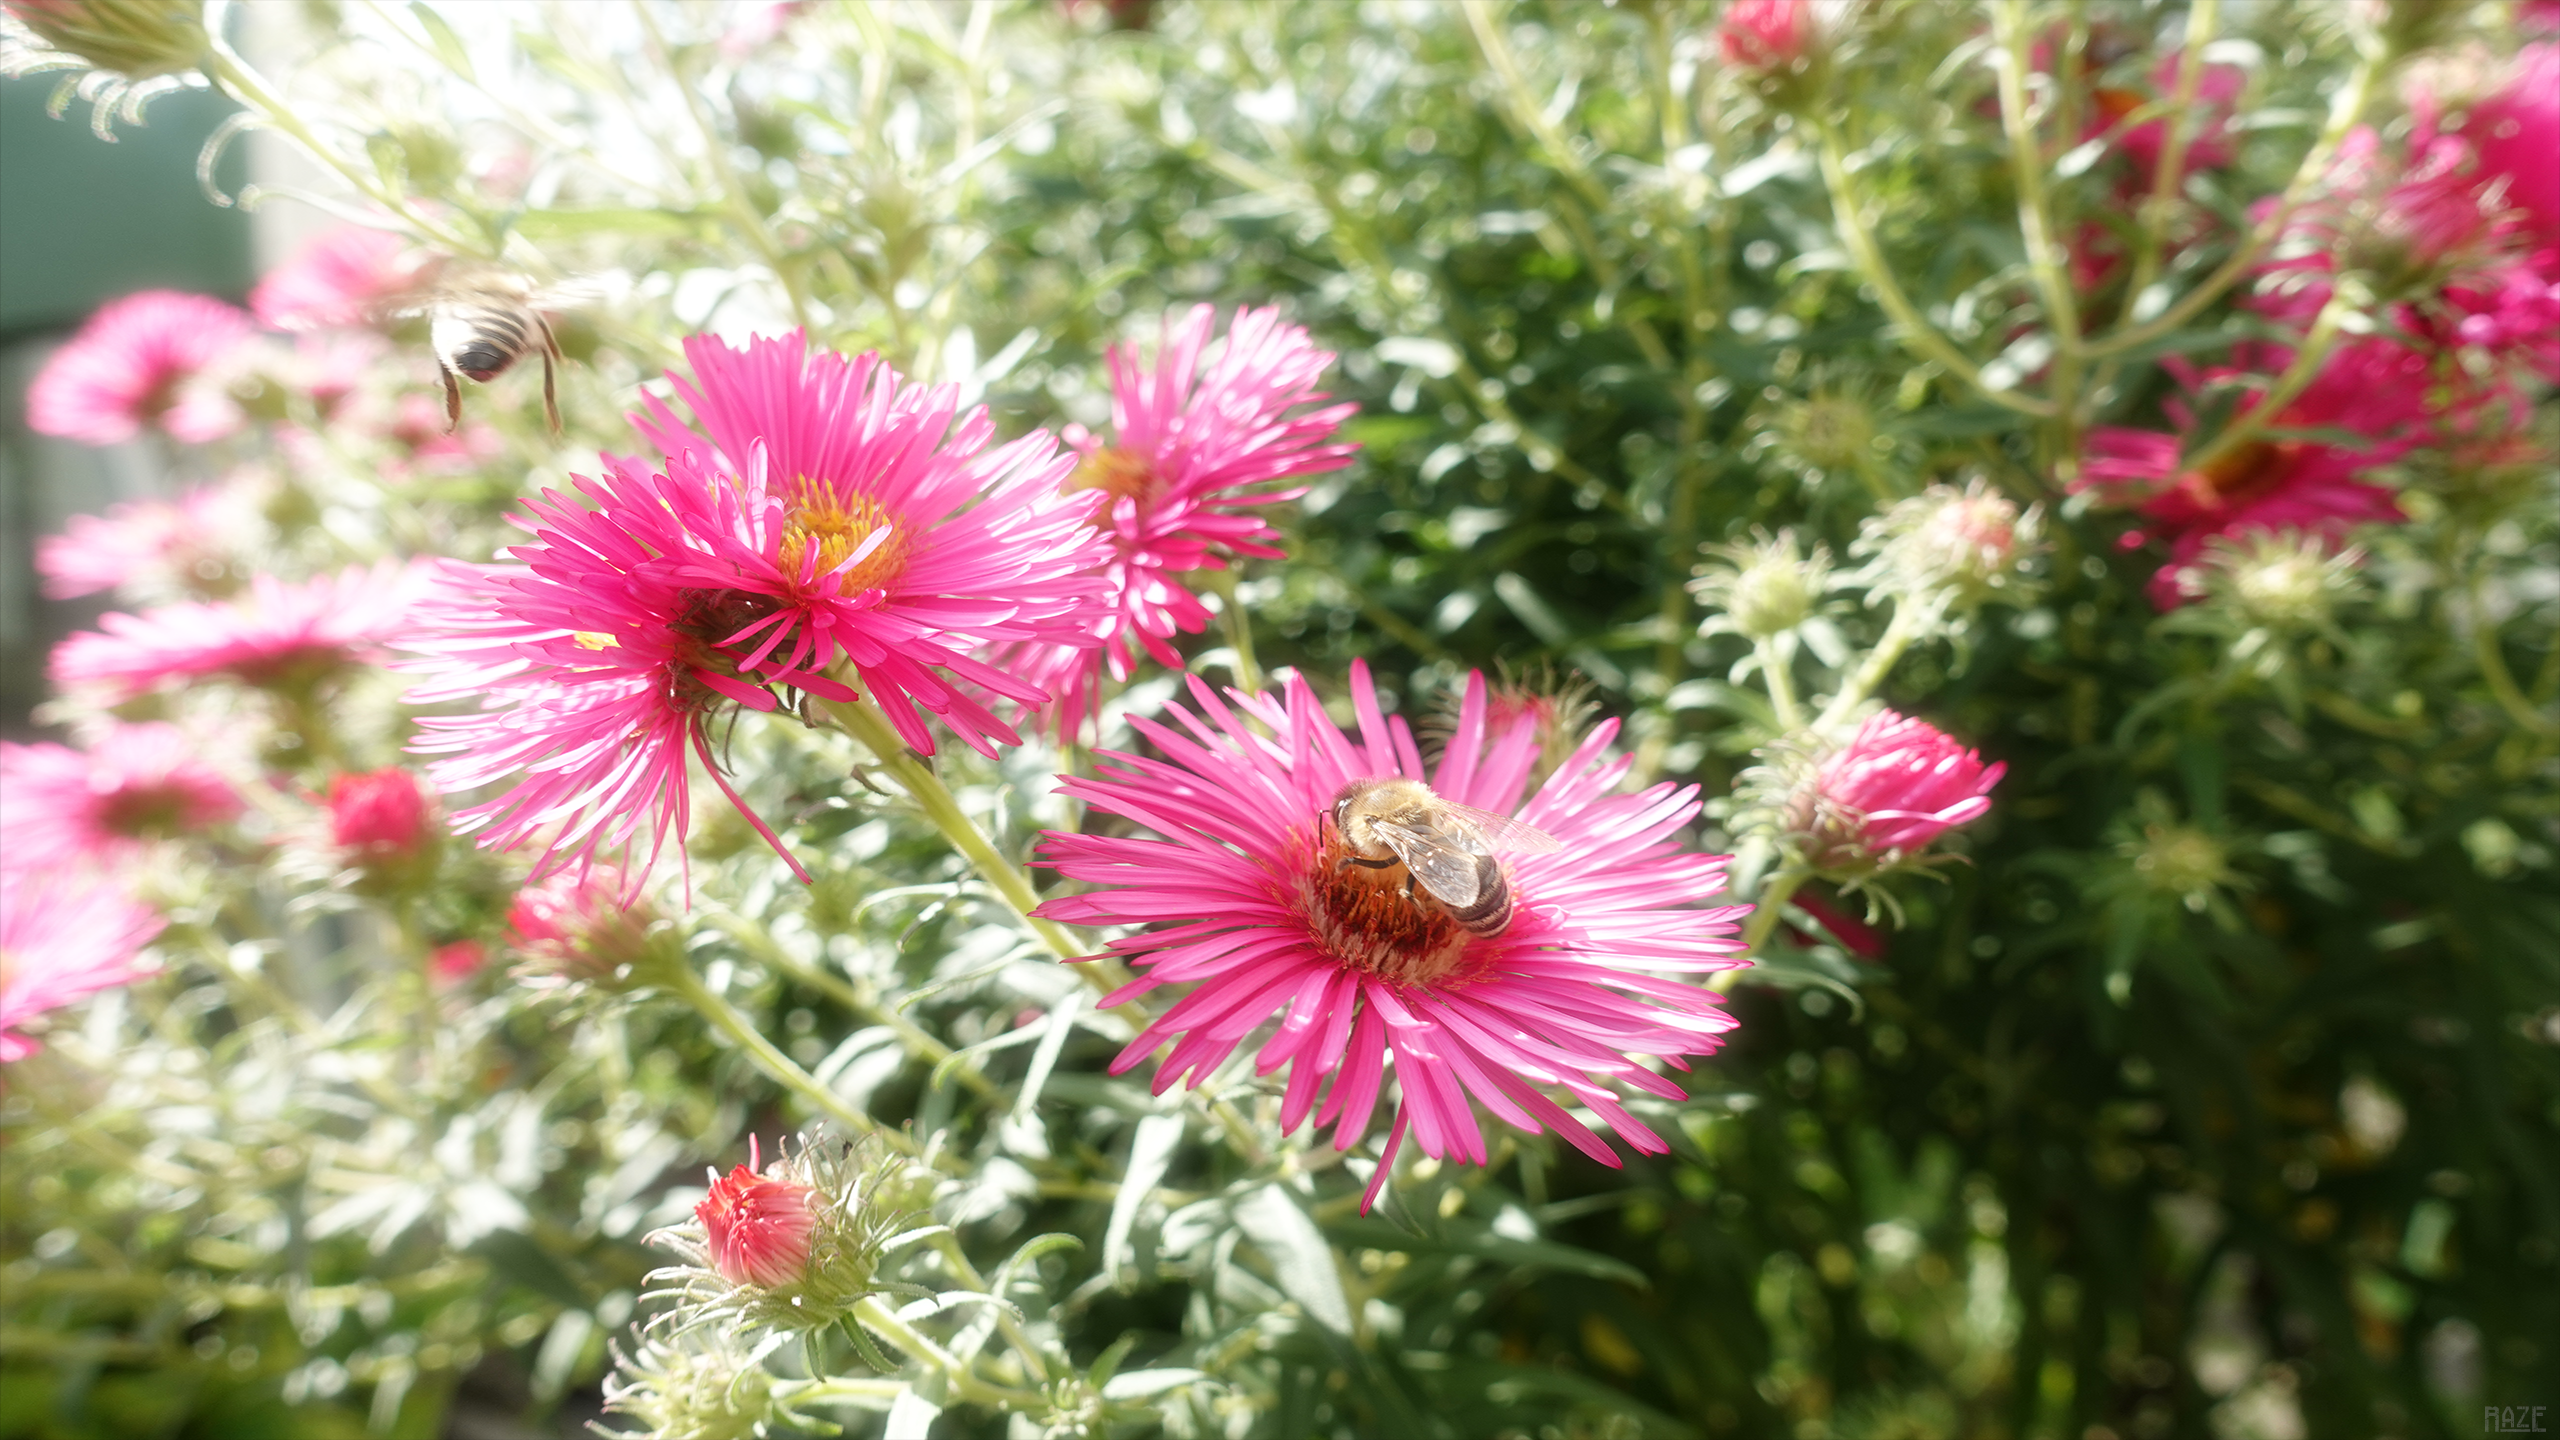 General 2560x1440 nature bees flowers photography